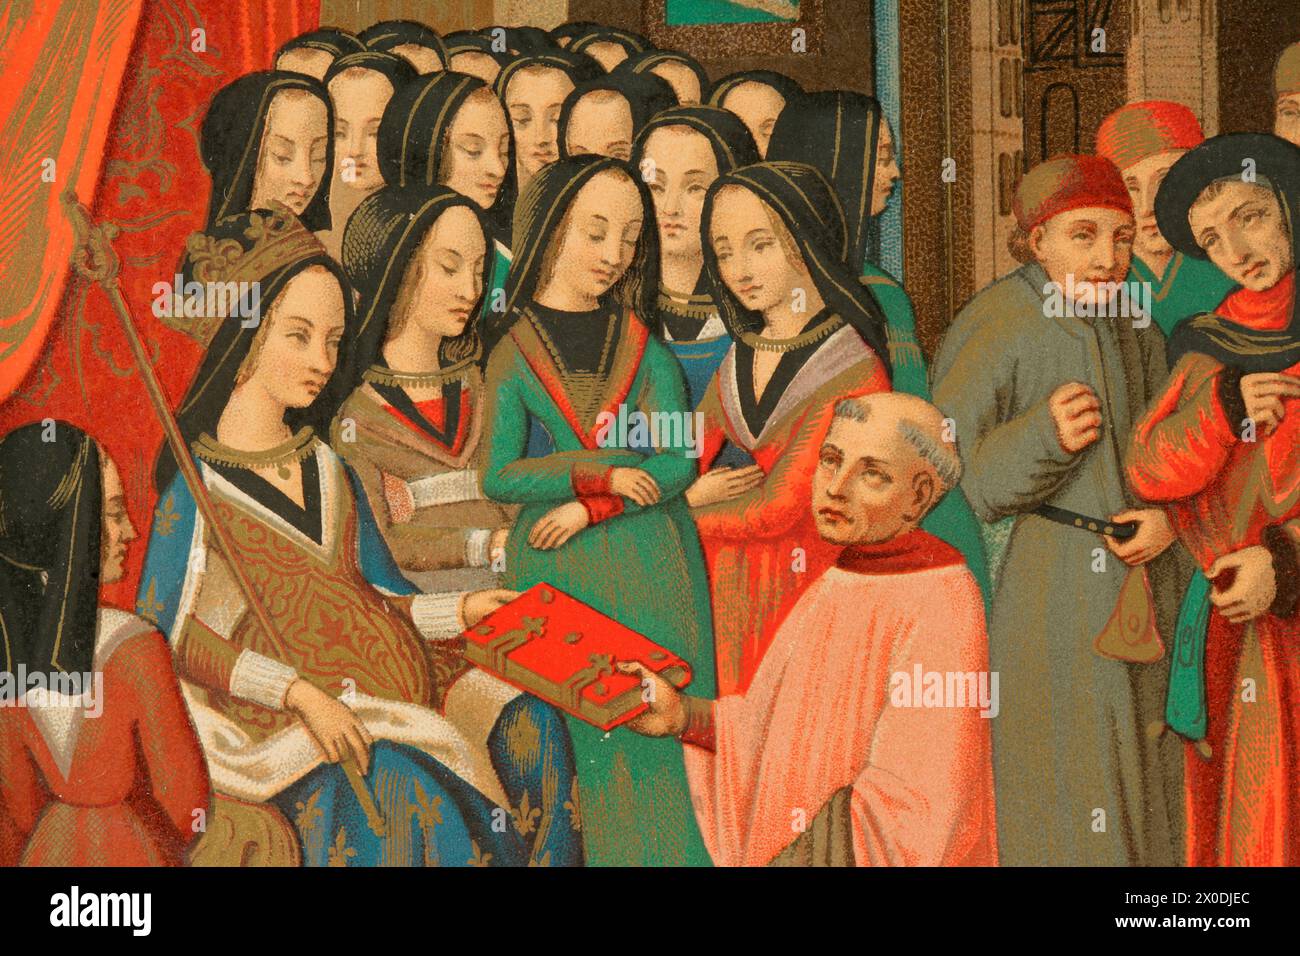 Marie of Anjou (1404-1463). Queen consort of France (1422-1461). The Court of Ladies of Marie of Anjou, wife of Charles VII. His chaplain, the scholar Robert Blondel, presents to her the allegorical treatise of the Twelve Perils of Hell which he composed for her, 1455. Chromolithography from a miniature of that book. Detail. 'Moeurs, usages et costumes au moyen-âge et à l'époque de la Renaissance', by Paul Lacroix. Paris, 1878. Stock Photo